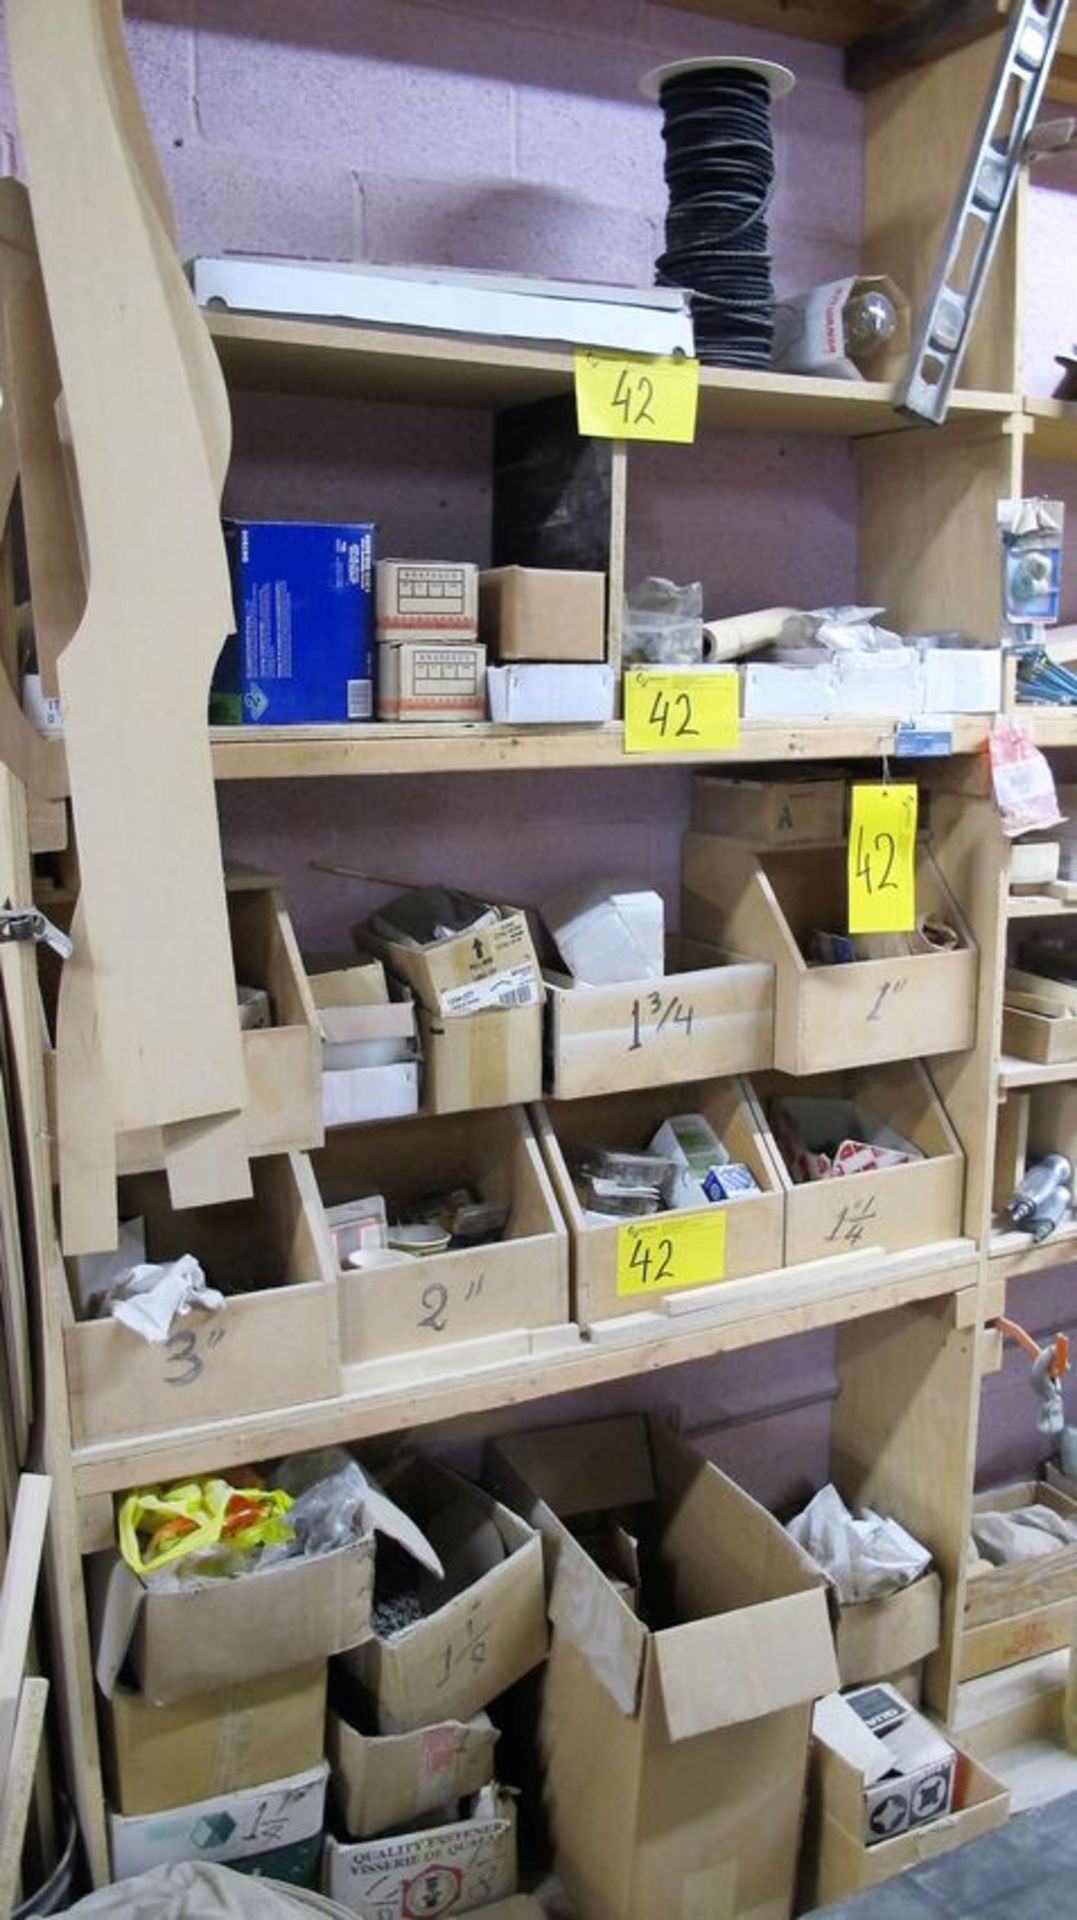 CONTENTS OF (2) SECTIONS OF SHELVING INCLUDING ASST. HARDWARE, FIXTURES, BOLTS, SCREWS, ETC.